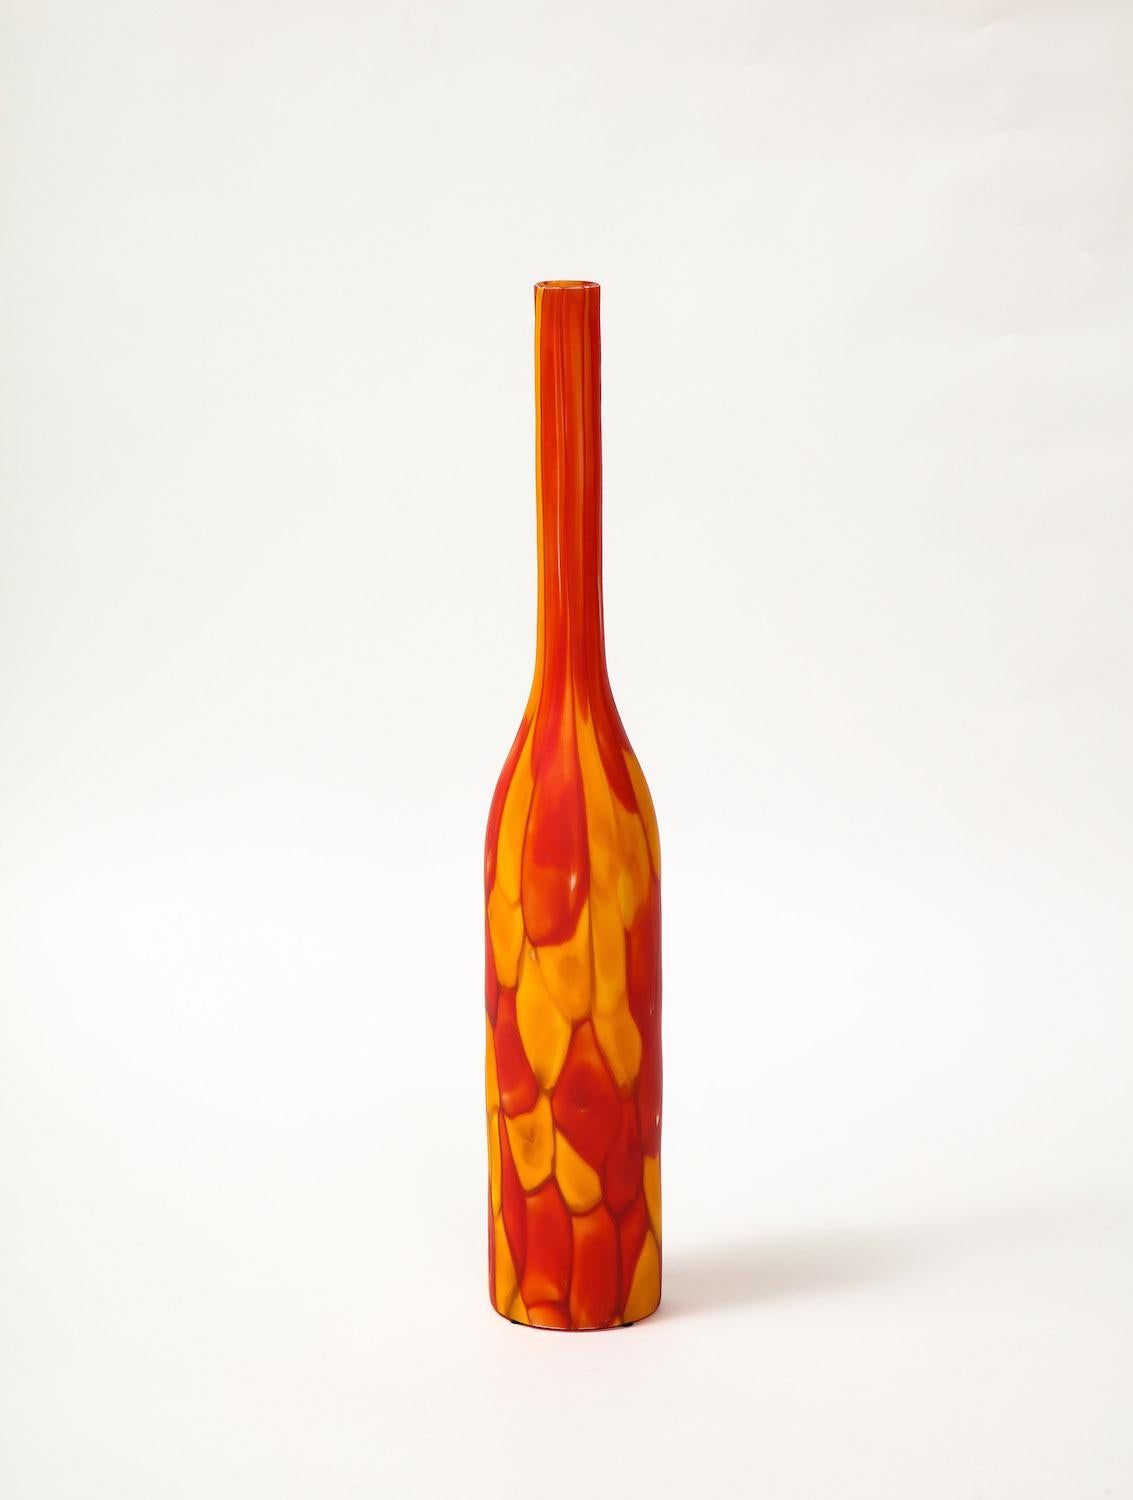 Hand-Crafted Nerox Bottle Form by Ermanno Toso for Fratelli Toso For Sale